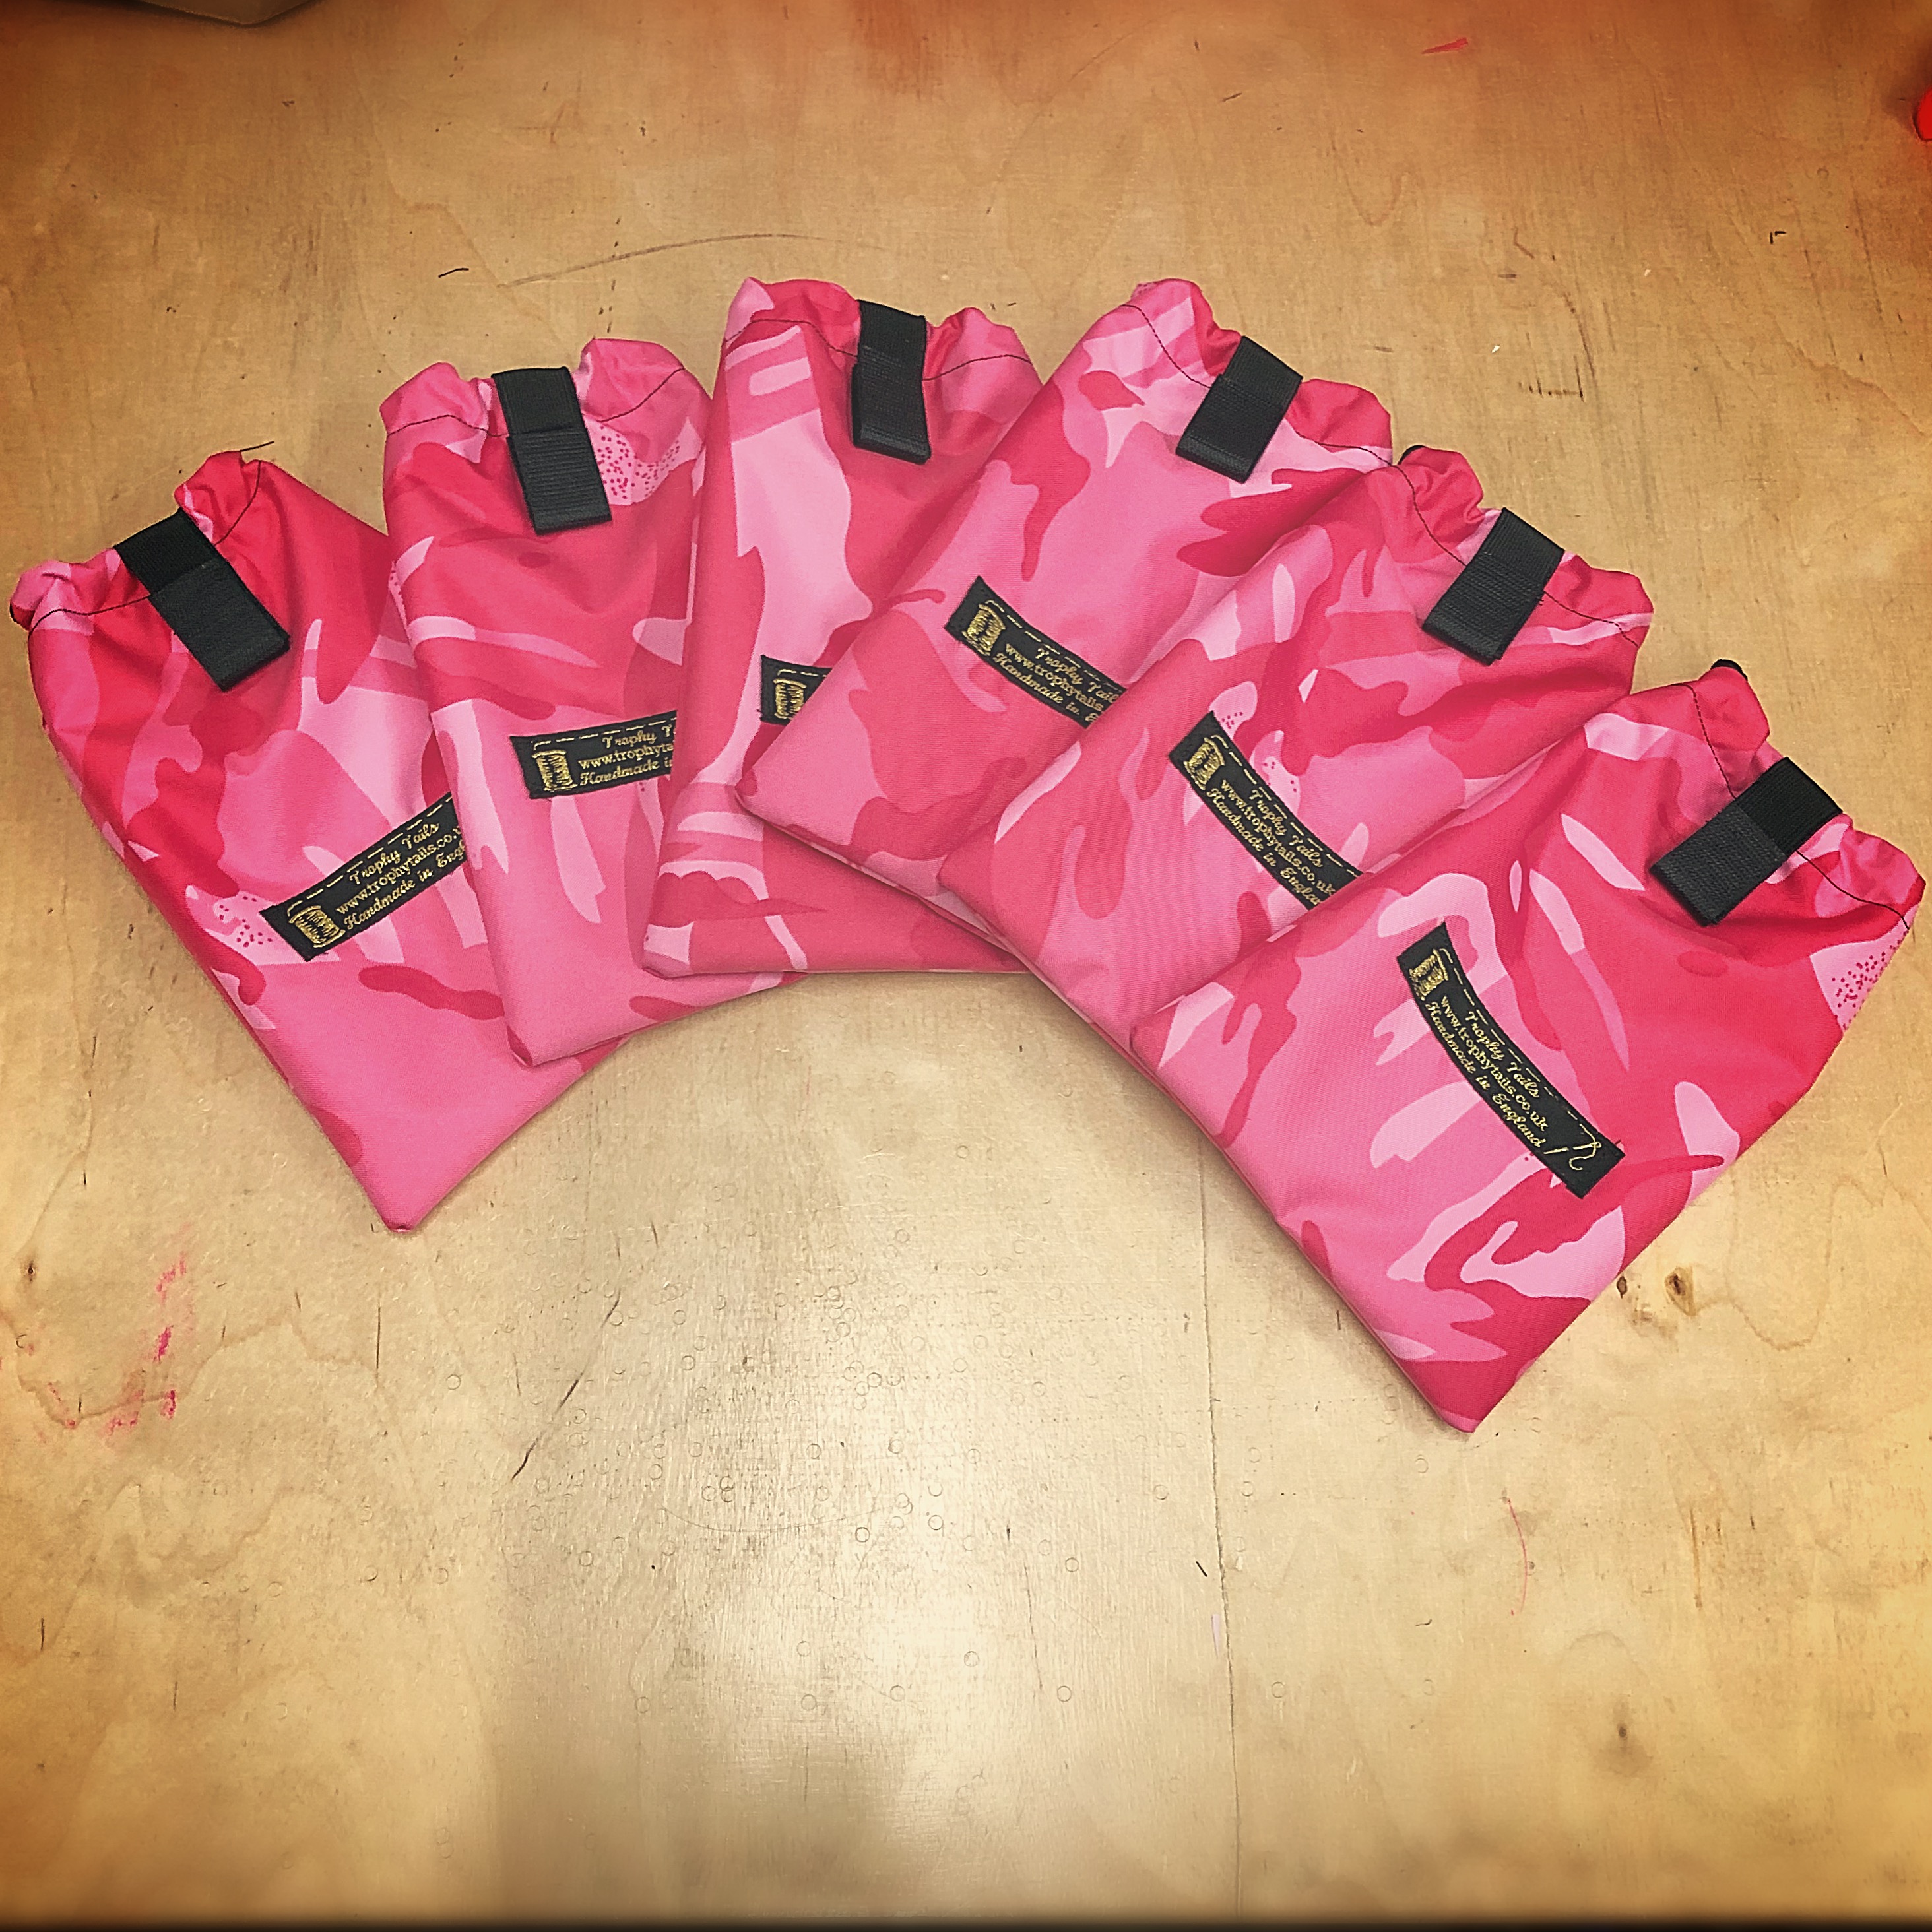 LIMITED EDITION - Pink camouflage - Mane Bags Set of 6